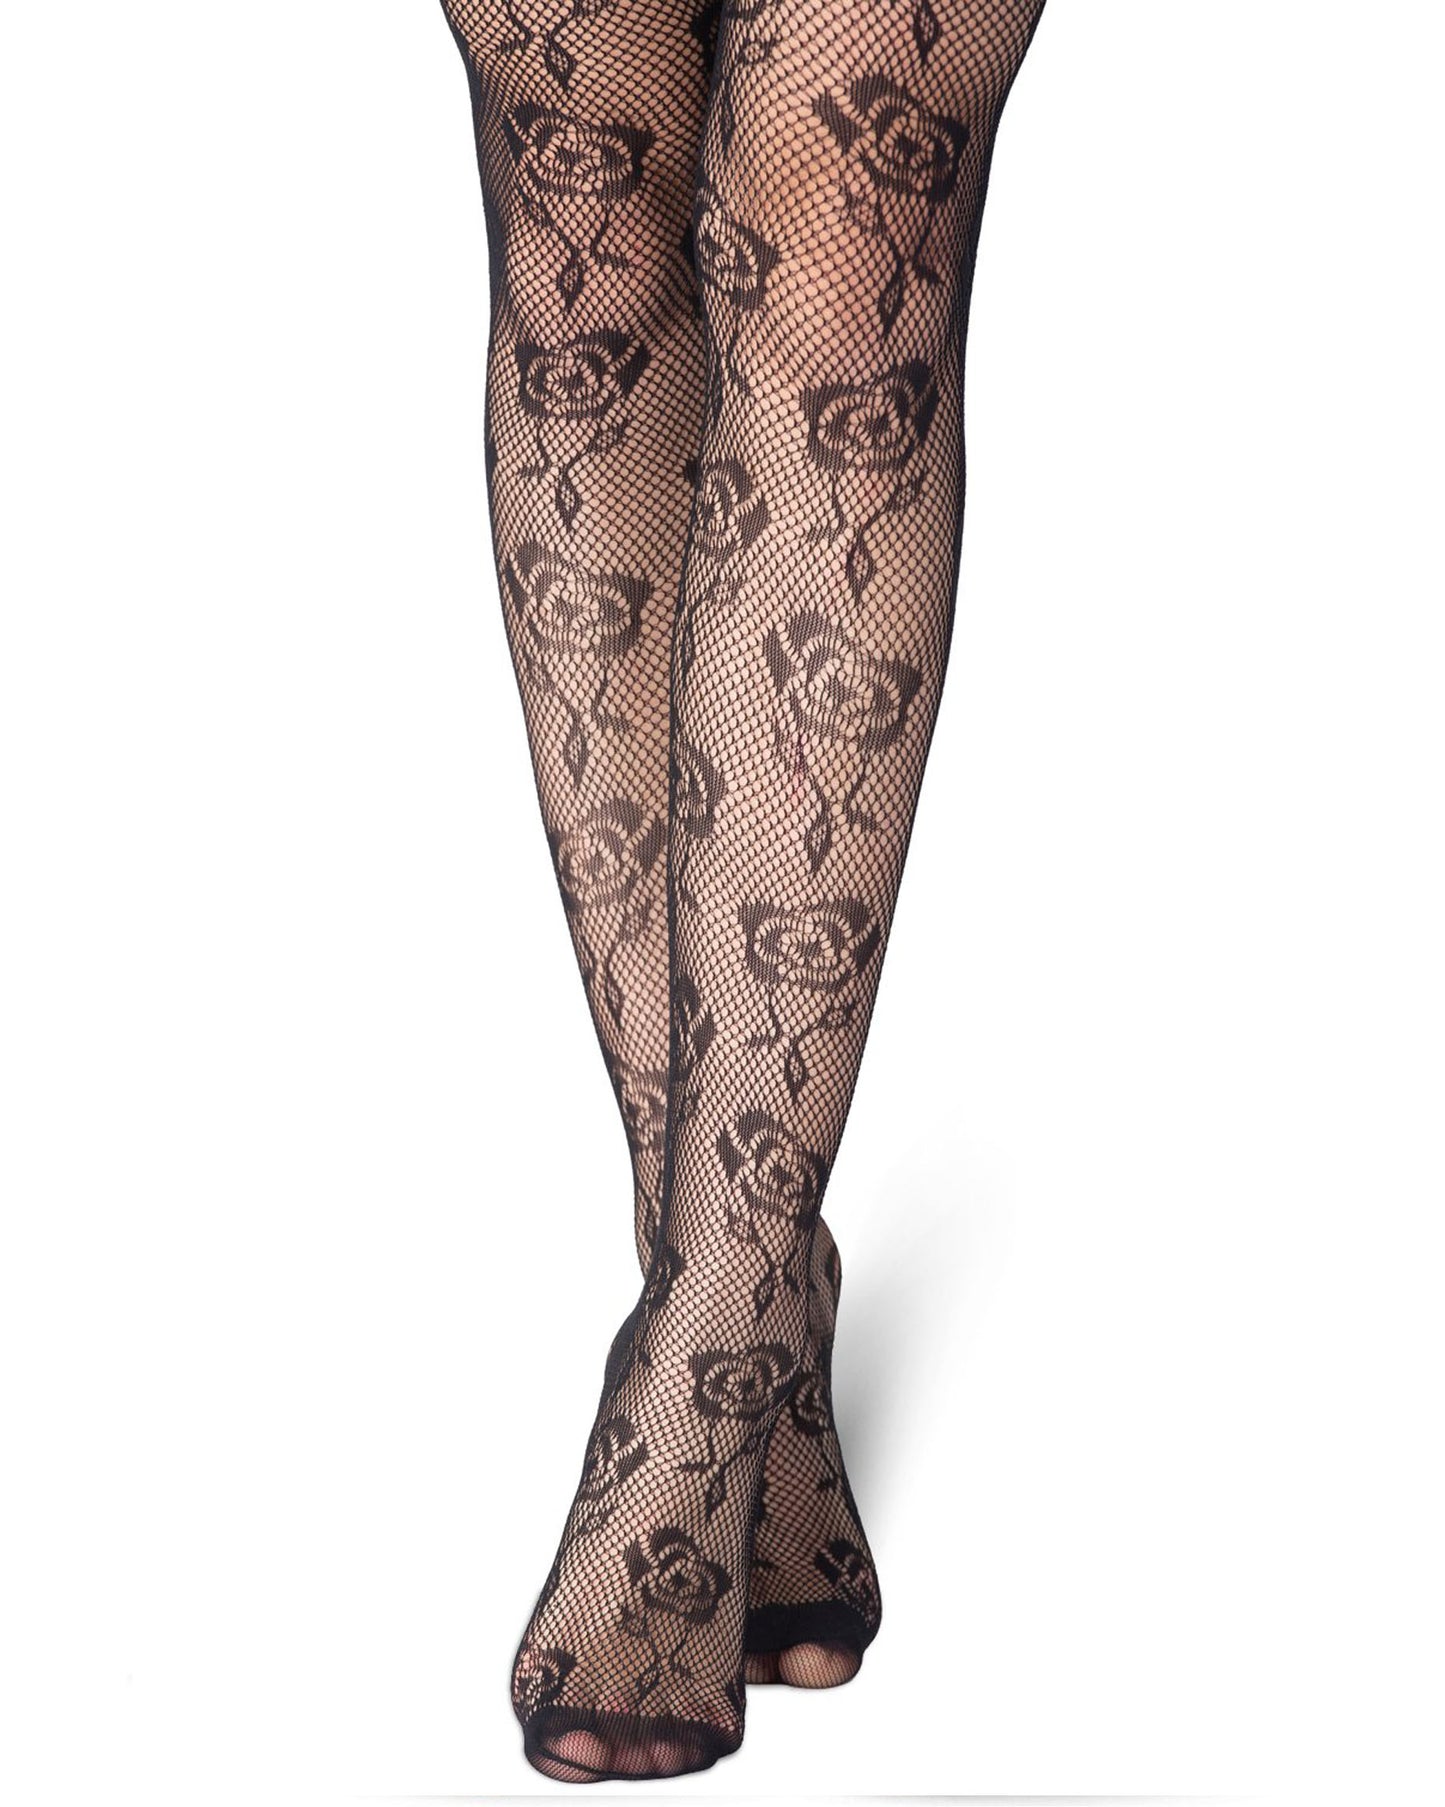 Emilio Cavallini Tiny Roses Tights - Black openwork fishnet tights with an all over roses lace style pattern and reinforced micromesh toe.